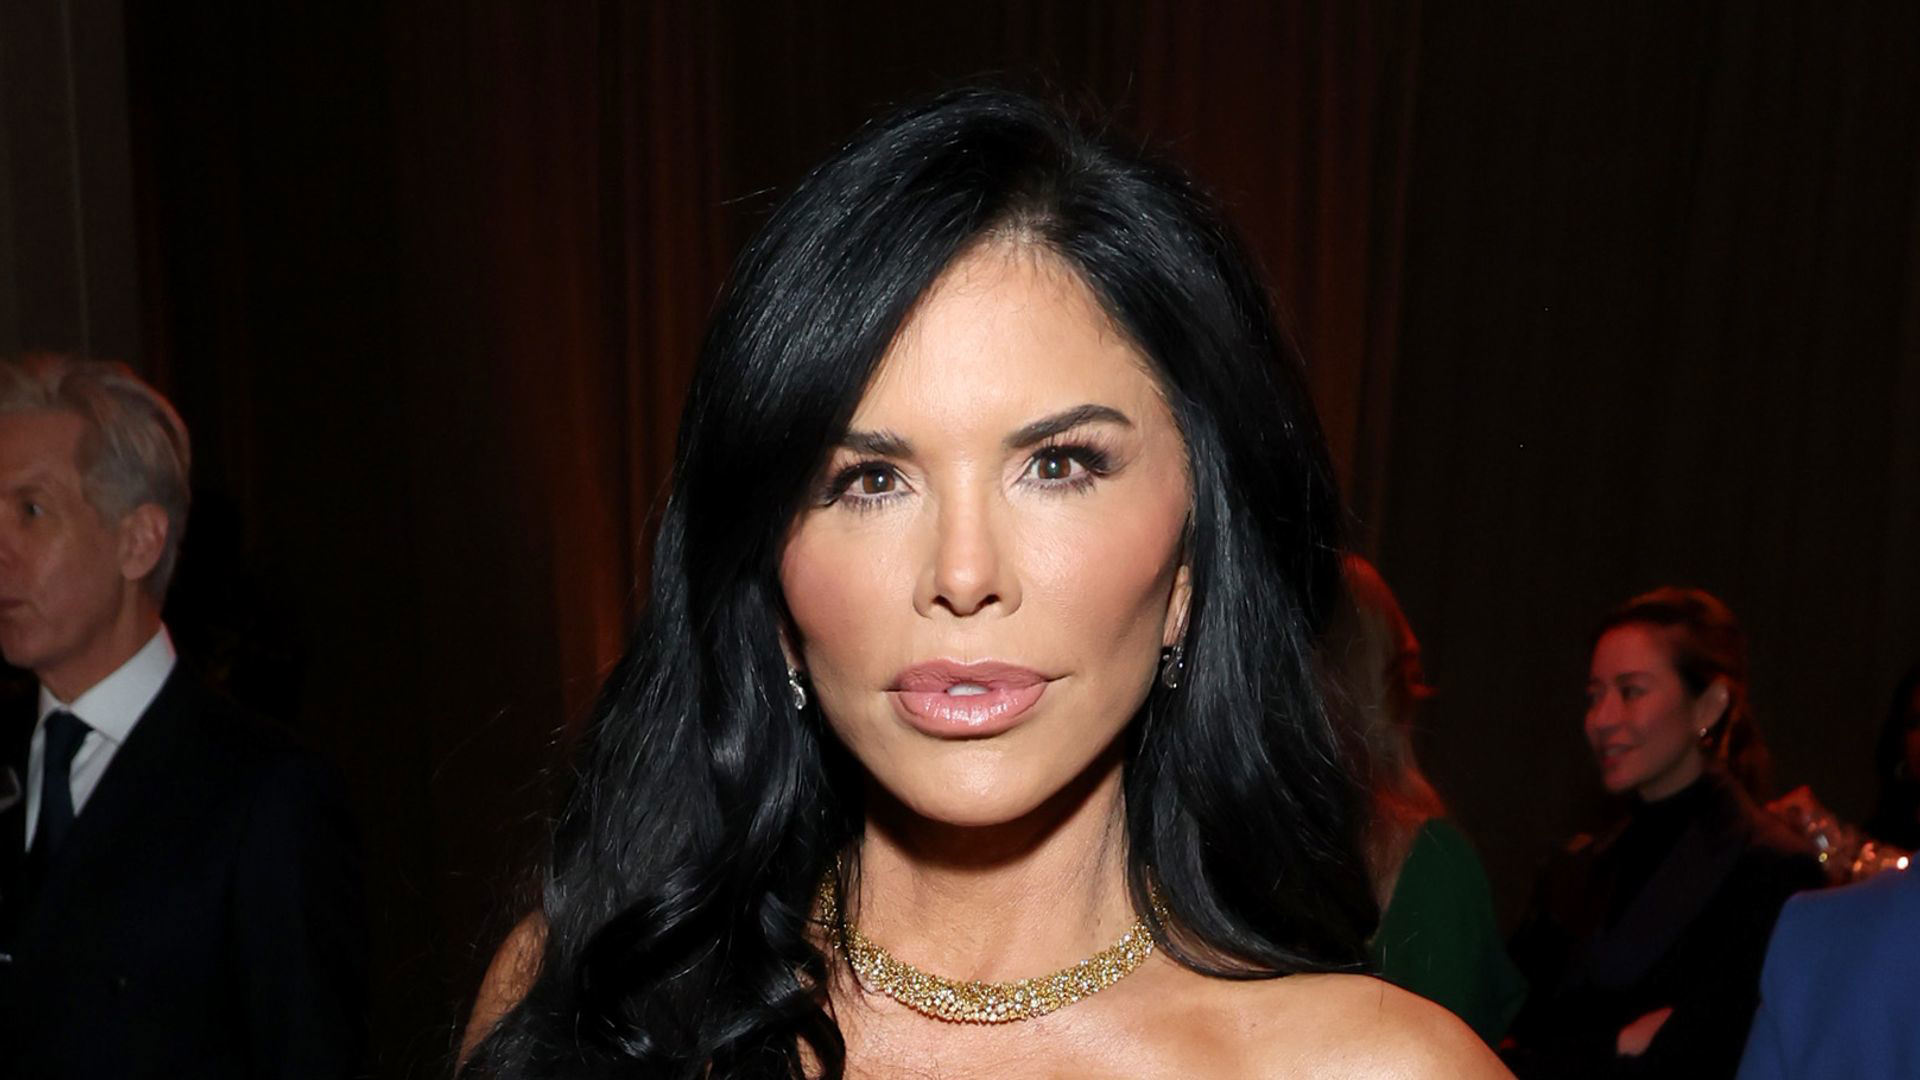 Lauren Sanchez dons glamorous figure-hugging red gown with cut-outs for ...